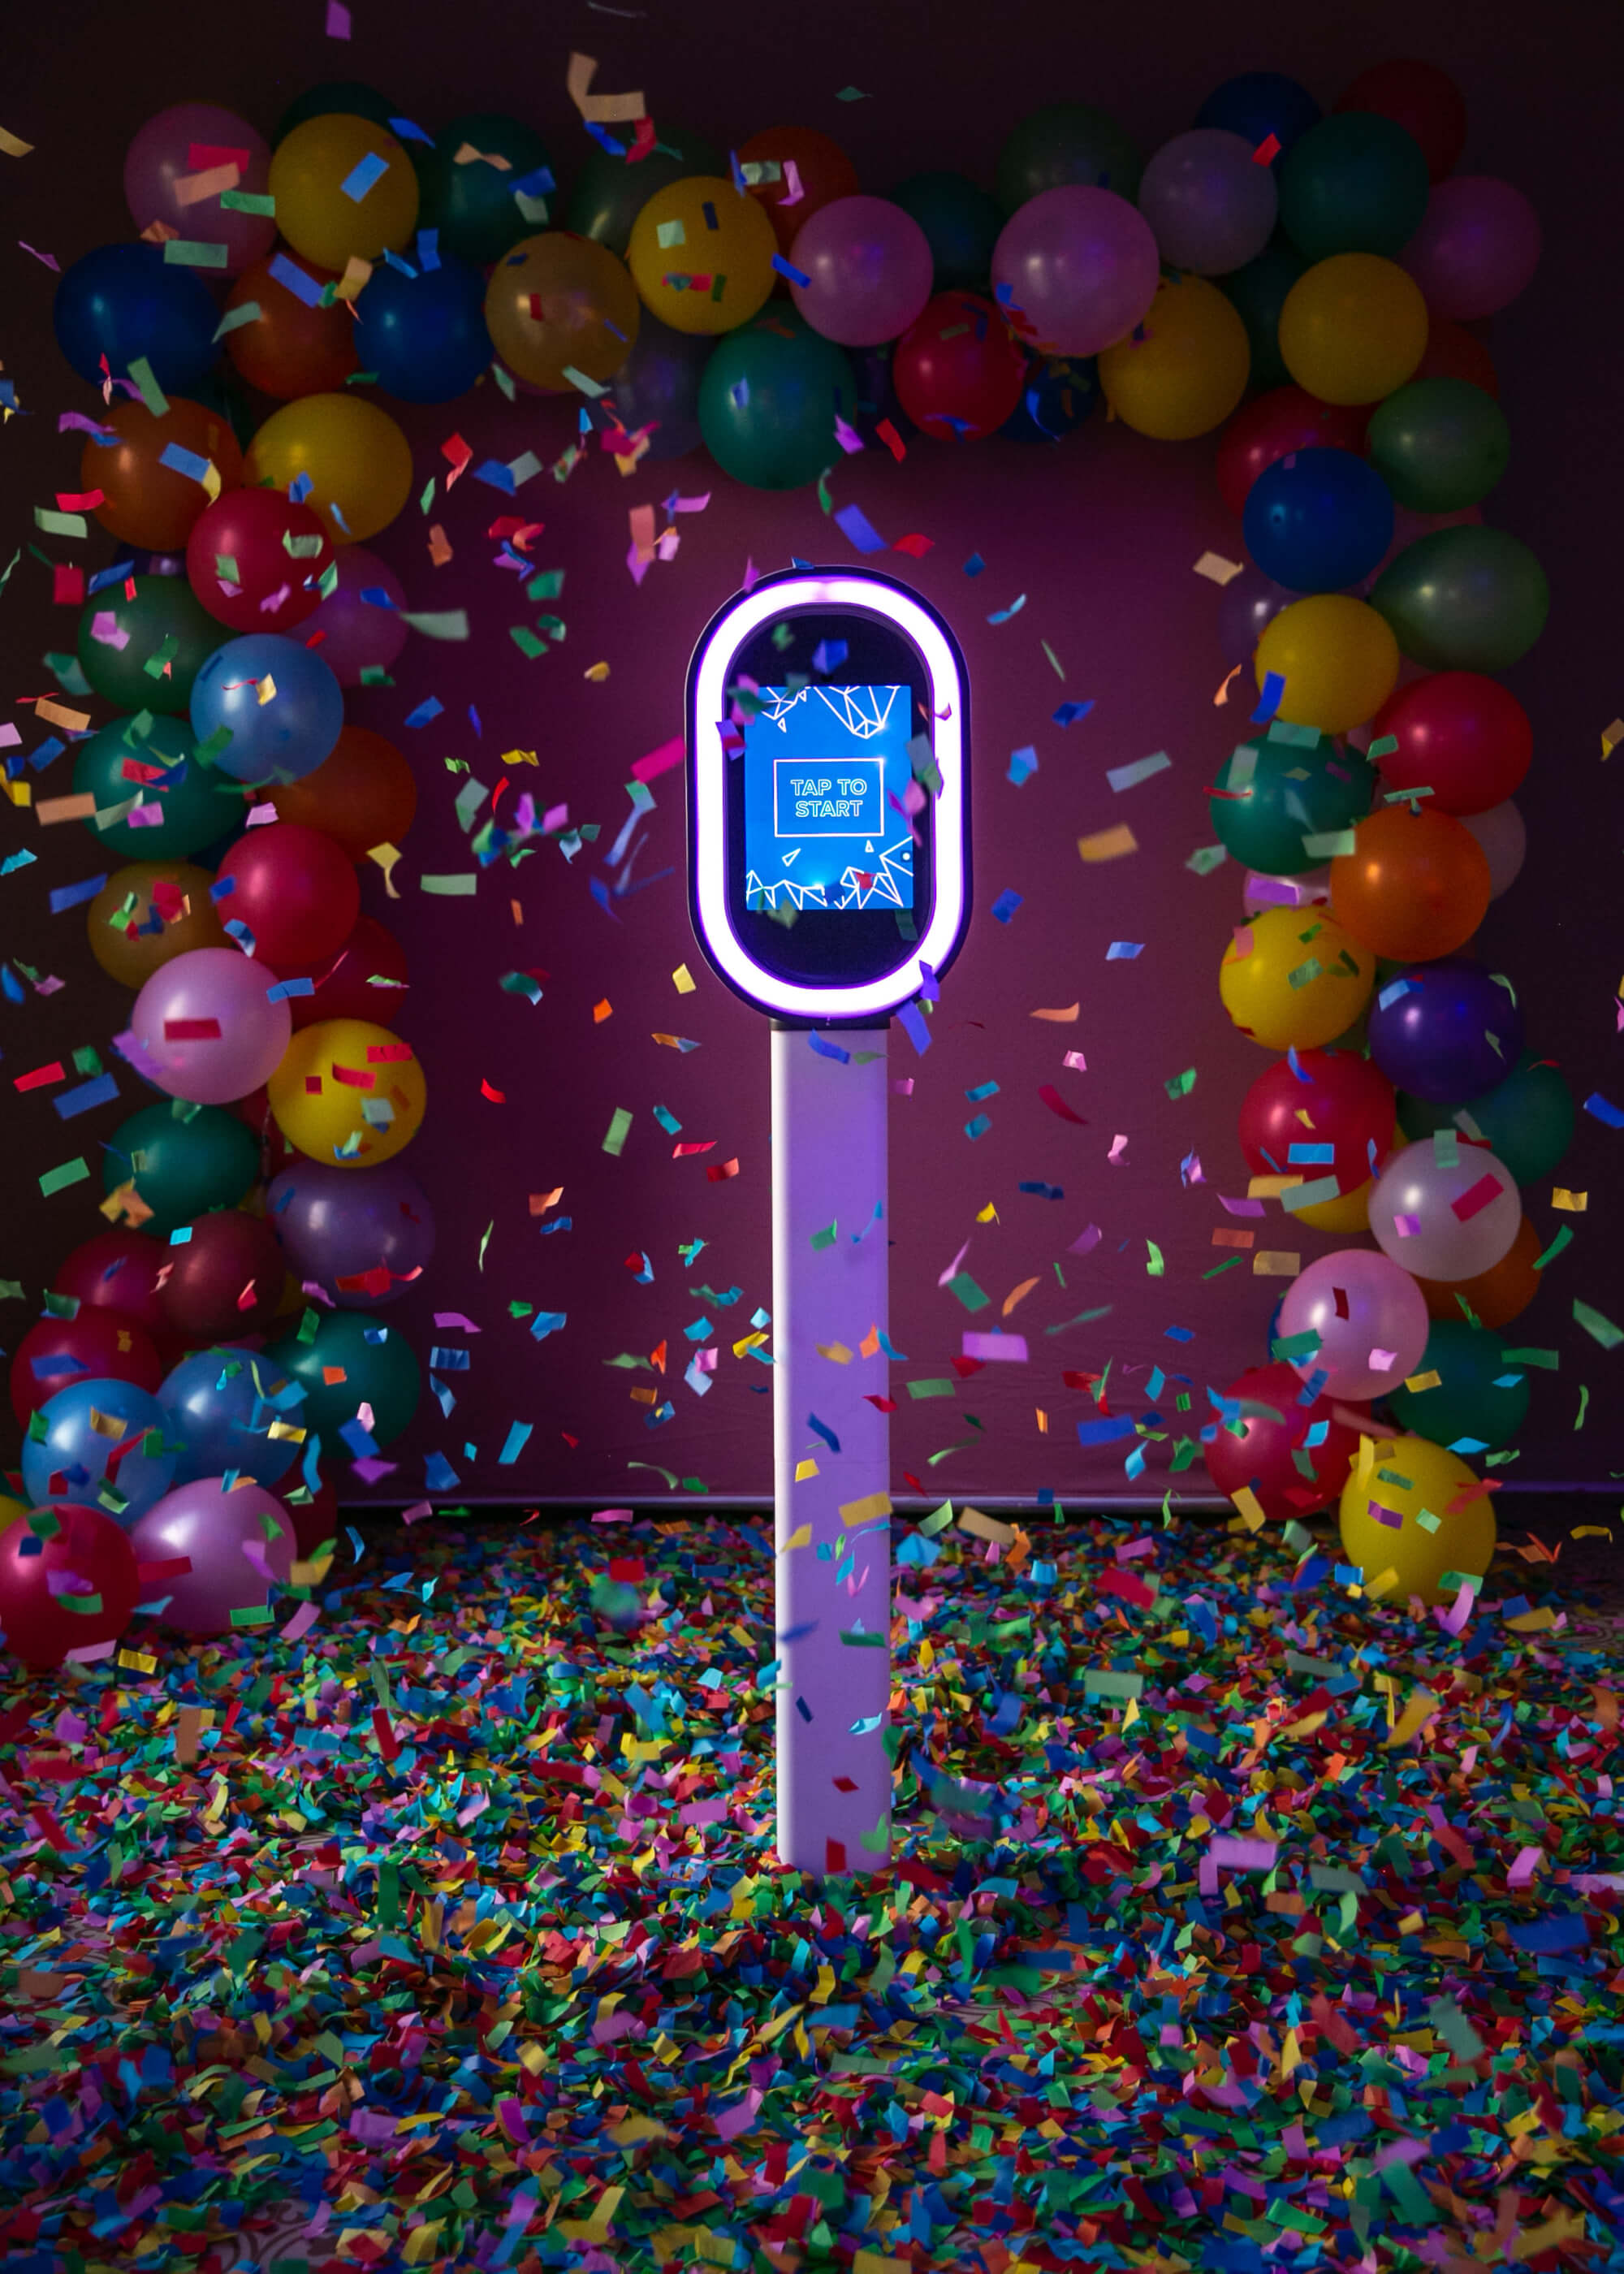 Ozark Pix photo booth kiosk with multi-colored confetti and balloon garland